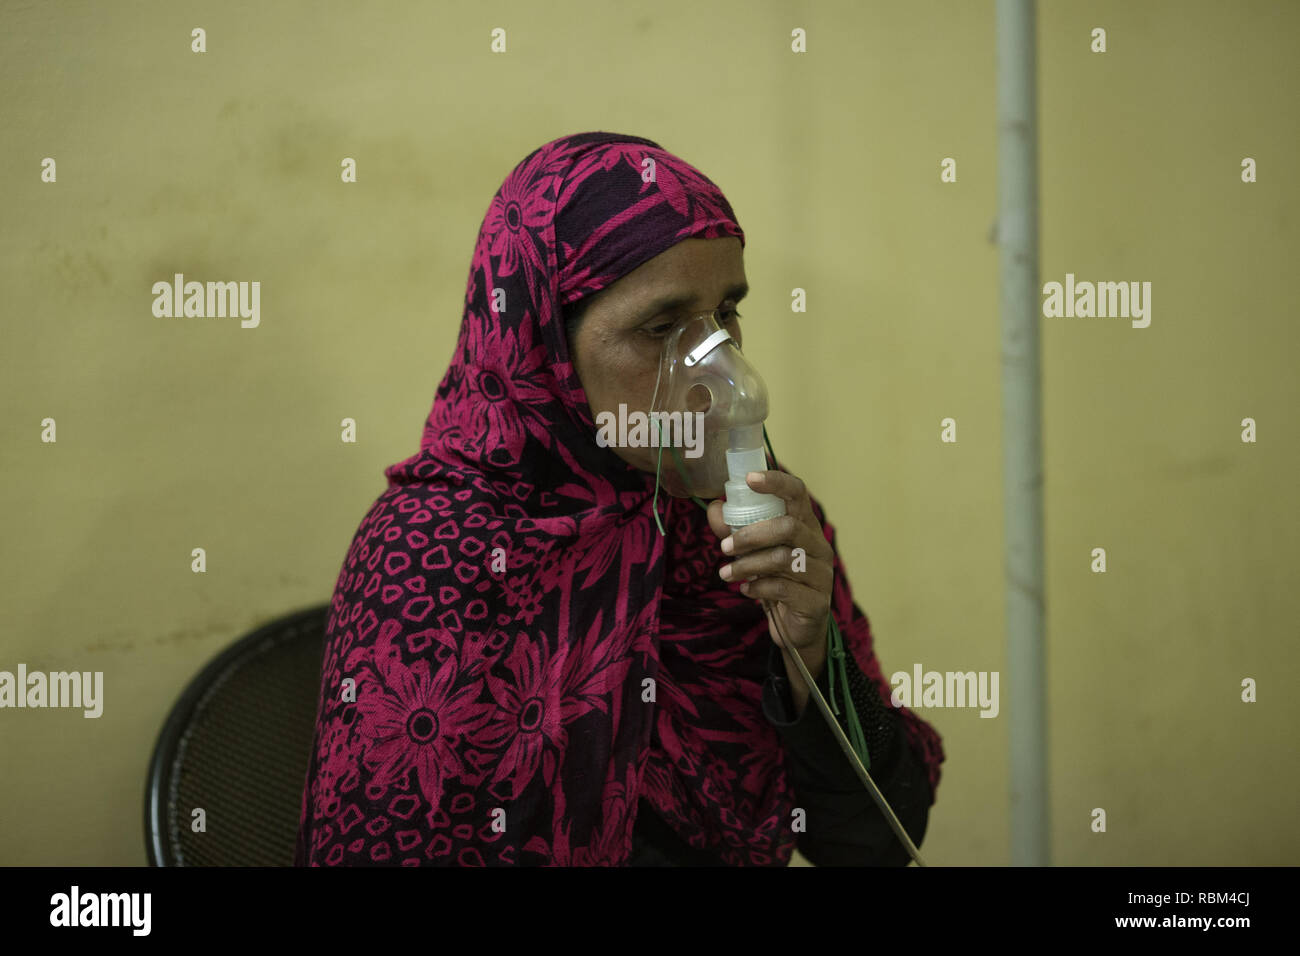 India. 10th Mar, 2017. A patient seen at Sambhavna Clinic using an oxygen mask to aid her breathing.Sambhavna Clinic Cares for victims of the Bhopal Gas Disaster.The Bhopal Gas Disaster was a gas leak incident on the night of 2-3 December 1984 at the Union Carbide plant in Bhopal. Over 500,000 people were exposed to the toxic methyl isocyanate (MIC) gas as they slept. The final death toll is estimated to be between 15,000 and 20,000. Credit: Ryan Ashcroft/SOPA Images/ZUMA Wire/Alamy Live News Stock Photo